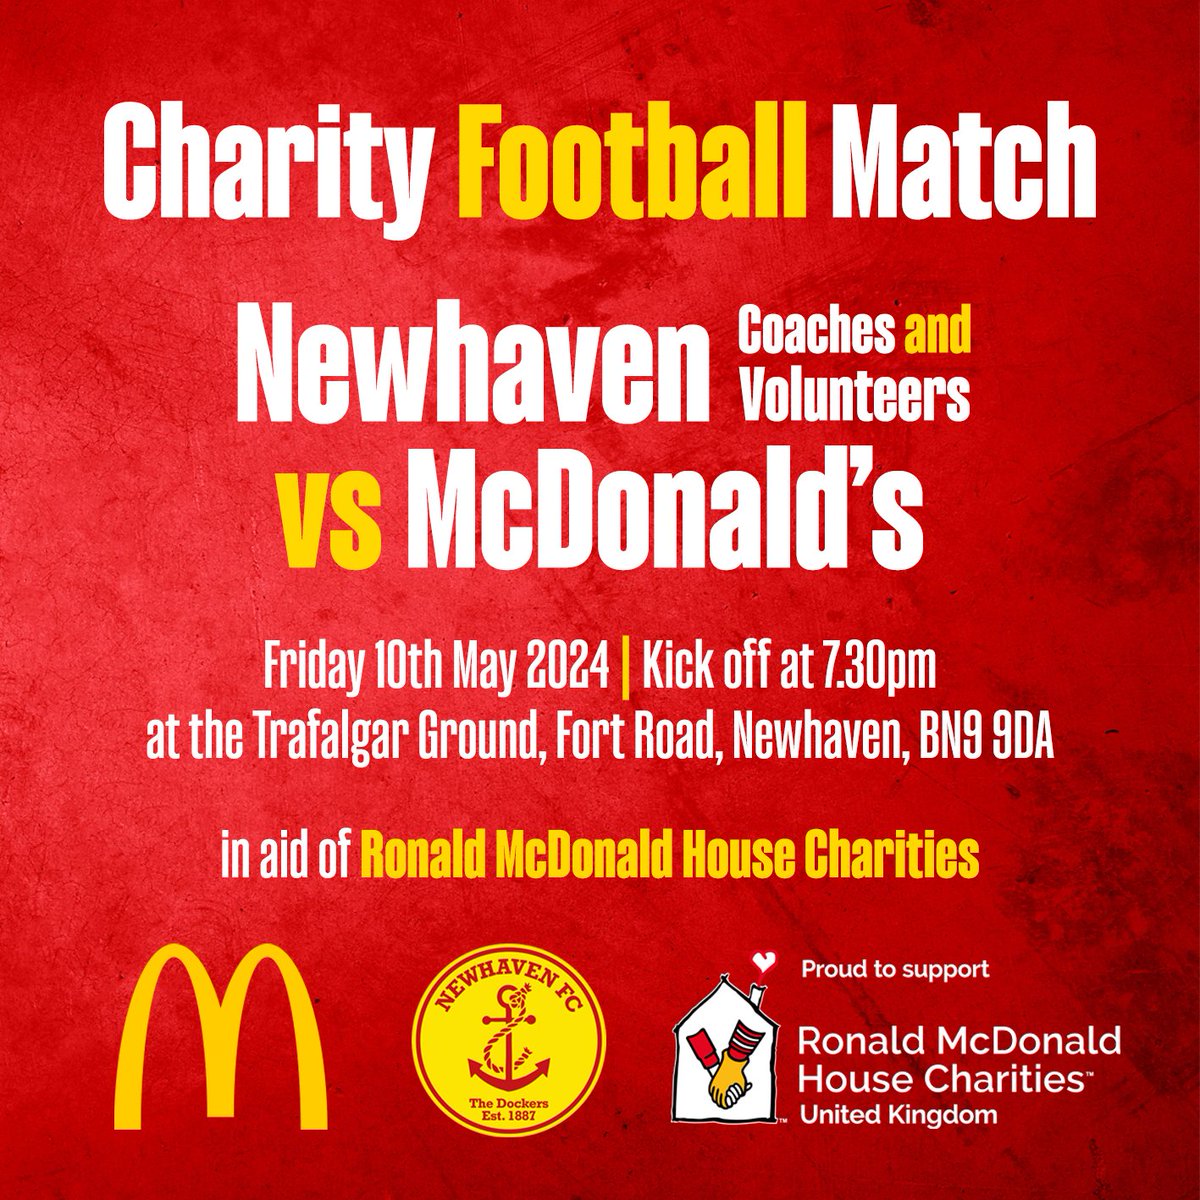 🔴🟡 𝗖𝗵𝗮𝗿𝗶𝘁𝘆 𝗙𝗼𝗼𝘁𝗯𝗮𝗹𝗹 𝗠𝗮𝘁𝗰𝗵! This Friday 10th May, our coaches and volunteers will pull on the kit to go head-to-head with @McDonaldsUK in aid of @RMHC. The game is being played at the Trafalgar Ground and will kick off at 7.30pm. Entry will be via donation.